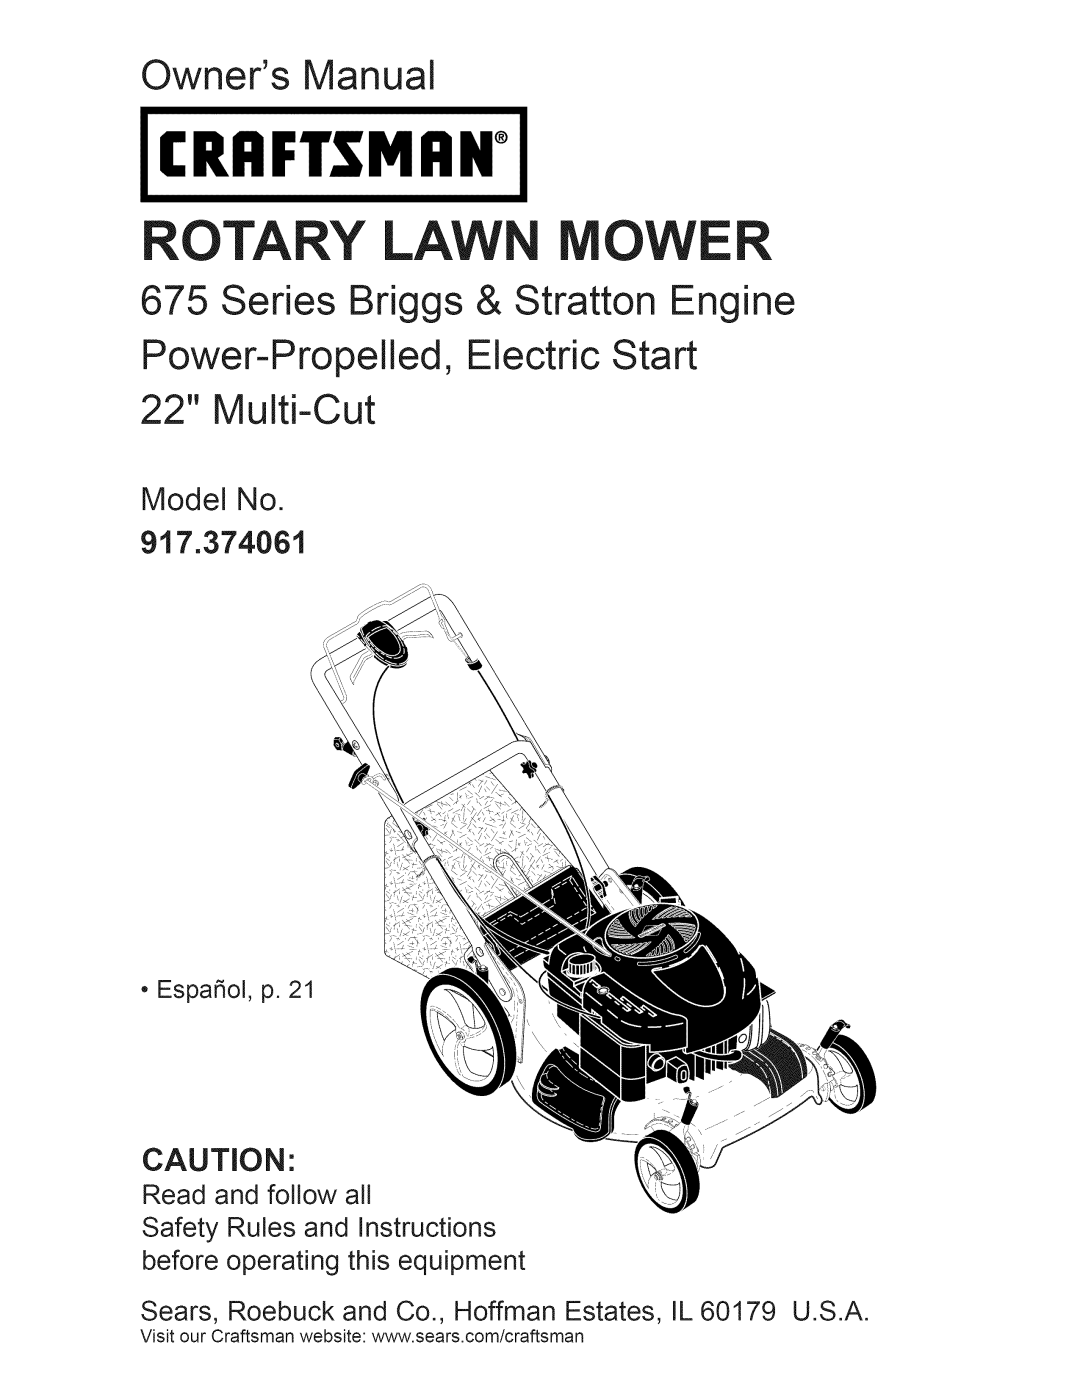 Craftsman 37406 owner manual Owners Manual, Series Briggs & Stratton Engine, Power-Propelled, Electric Start 22 Multi-Cut 